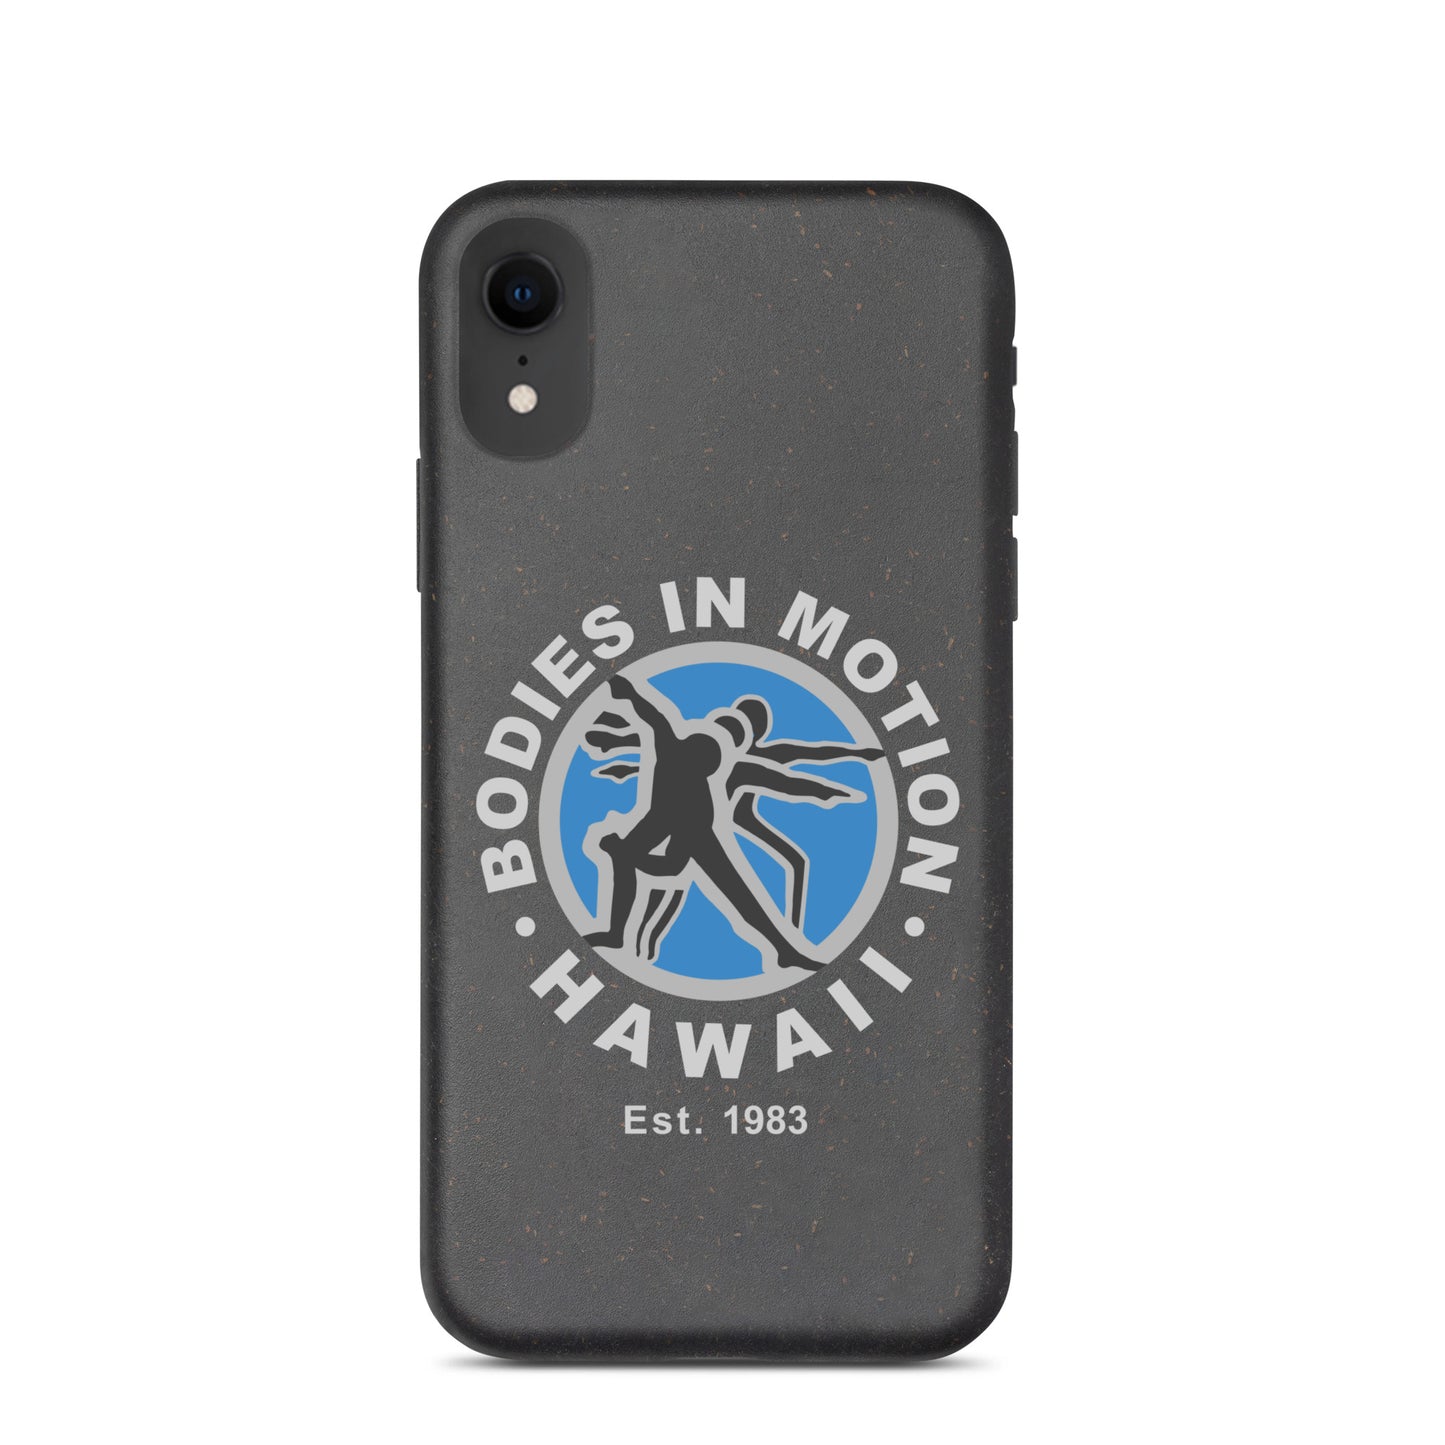 Bodies in Motion Speckled iPhone case